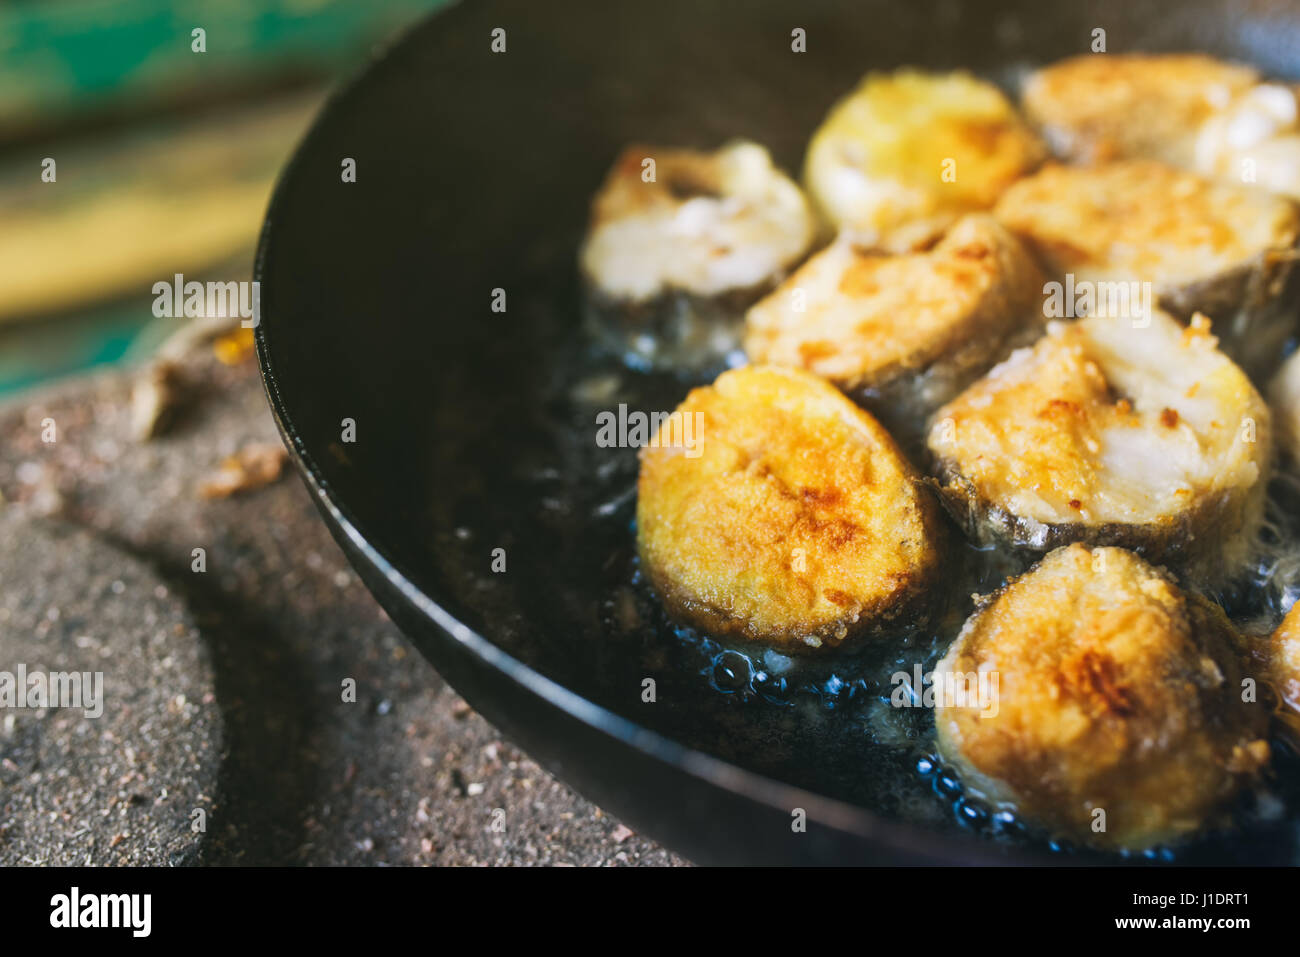 Frying hake fish outdoors on picnic, close up of frying pan with oil and fish slices Stock Photo